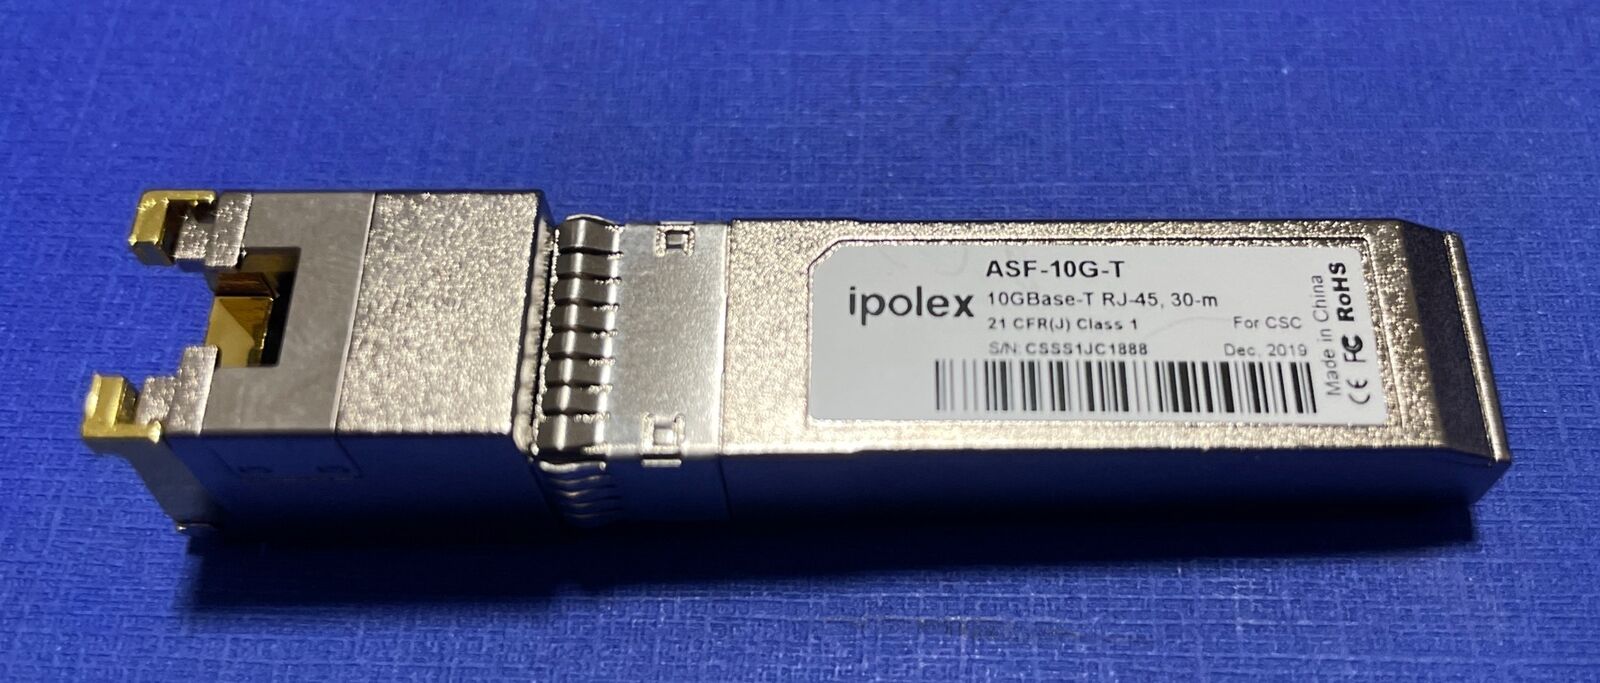 IPOLEX ASF-10G-T 10GBase-T 10GbE SFP+ to RJ-45 Copper Optical Transceiver Module